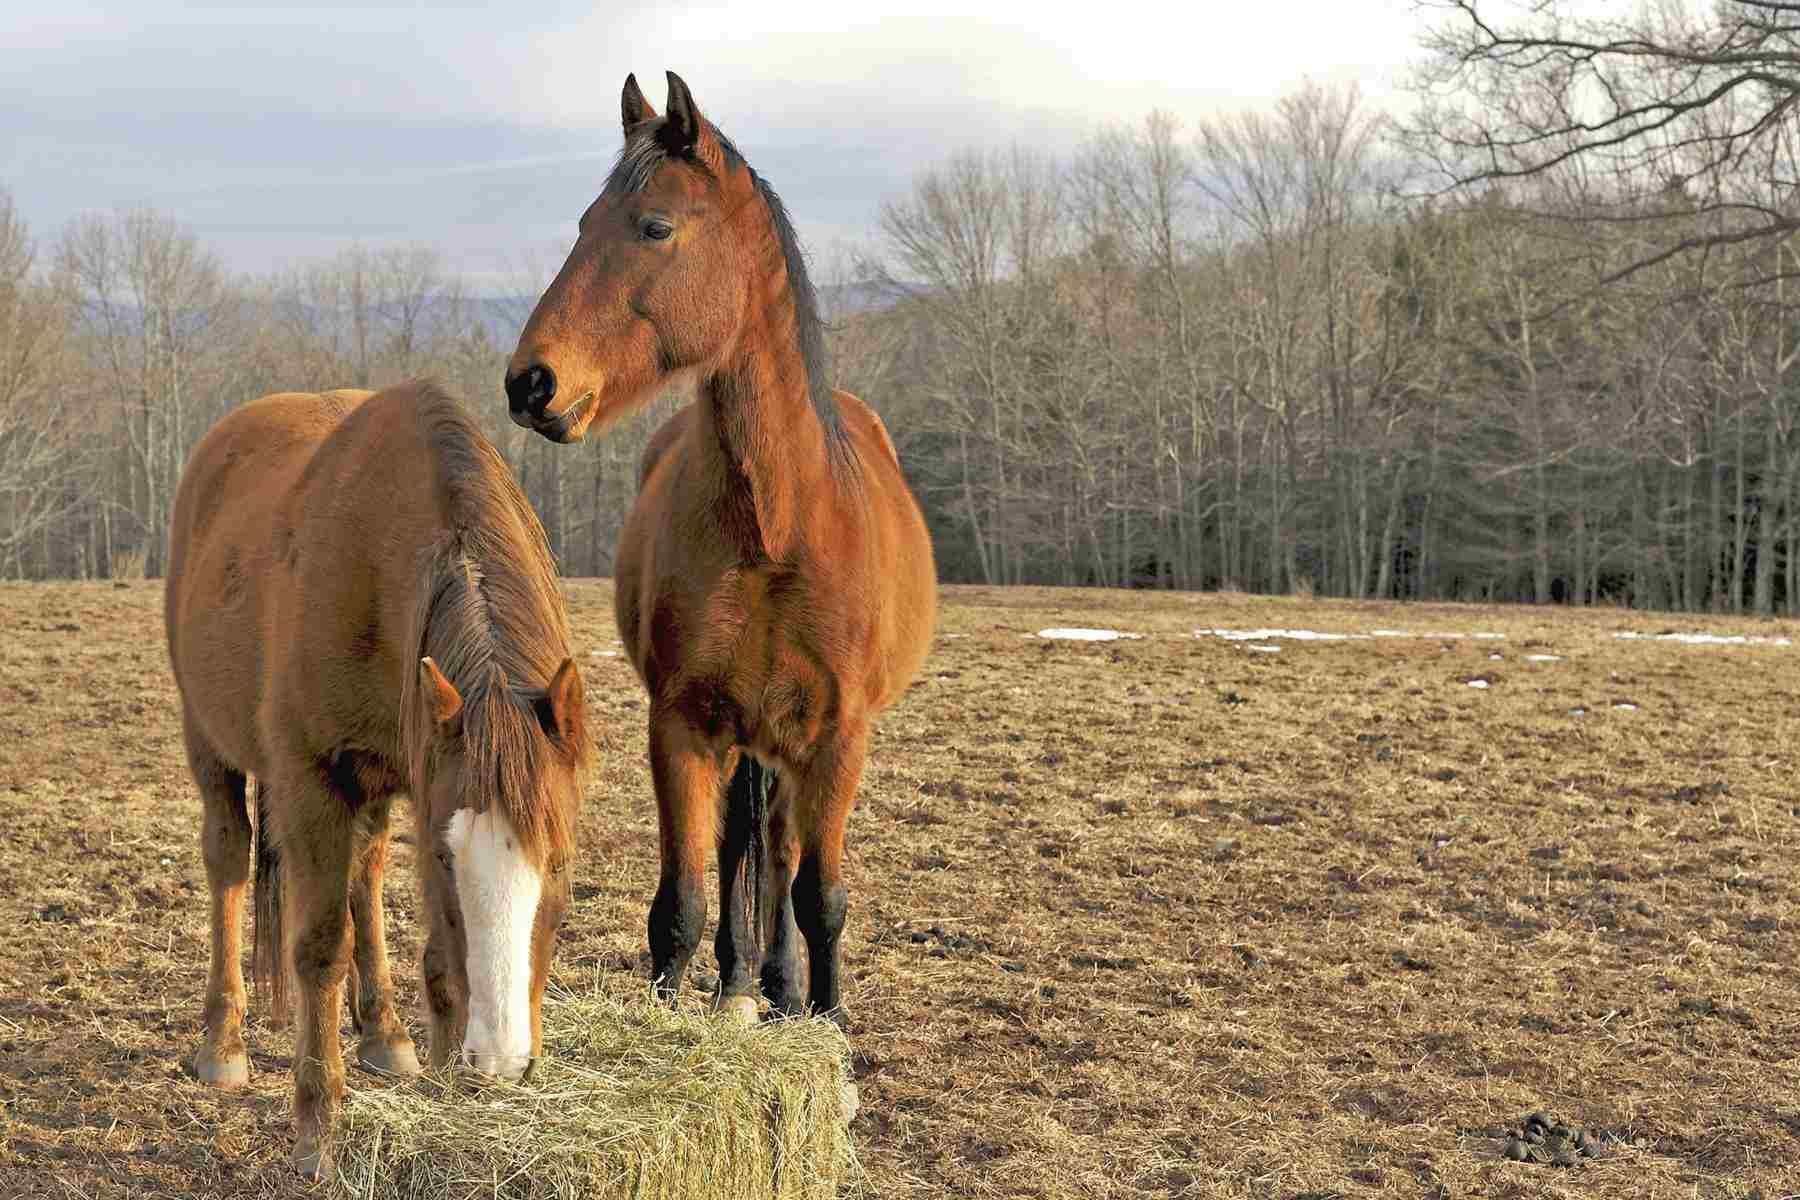 Horses eating hay in country field in the winter